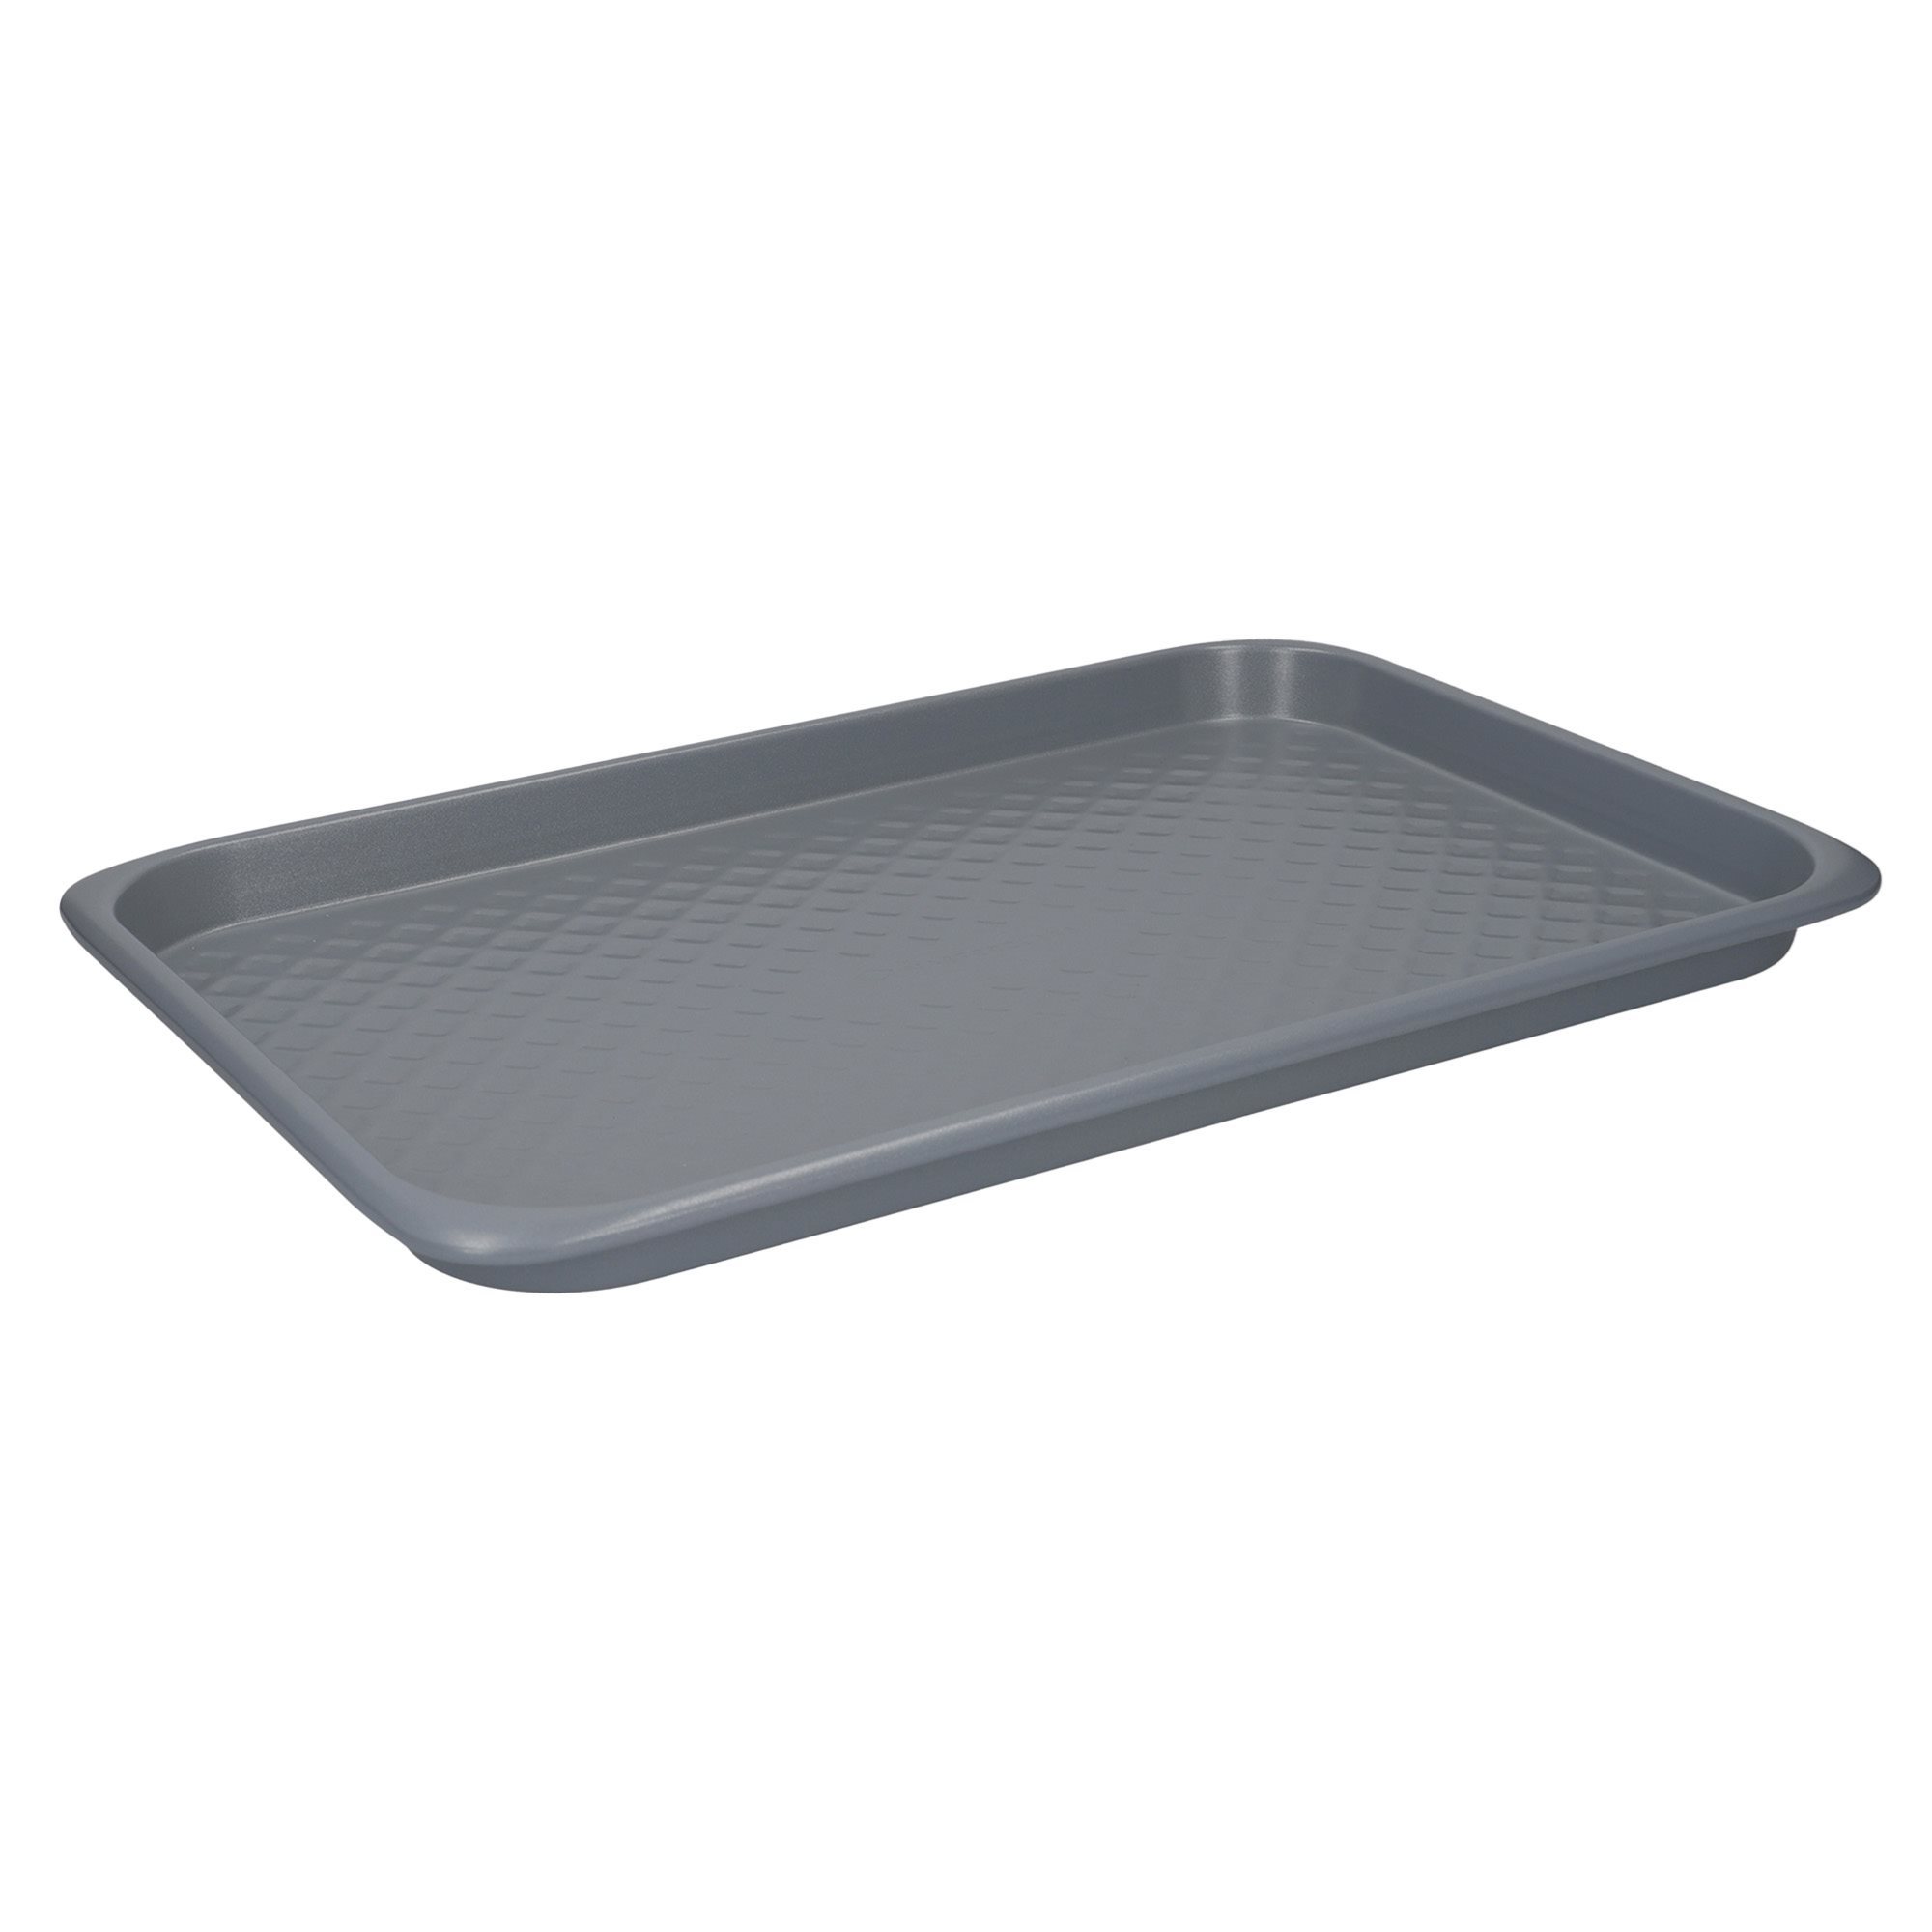 MasterClass Baking Tray, Non-Stick Oven Tray for Baking and Roasting,  Carbon Steel, 24 x 18cm, Grey